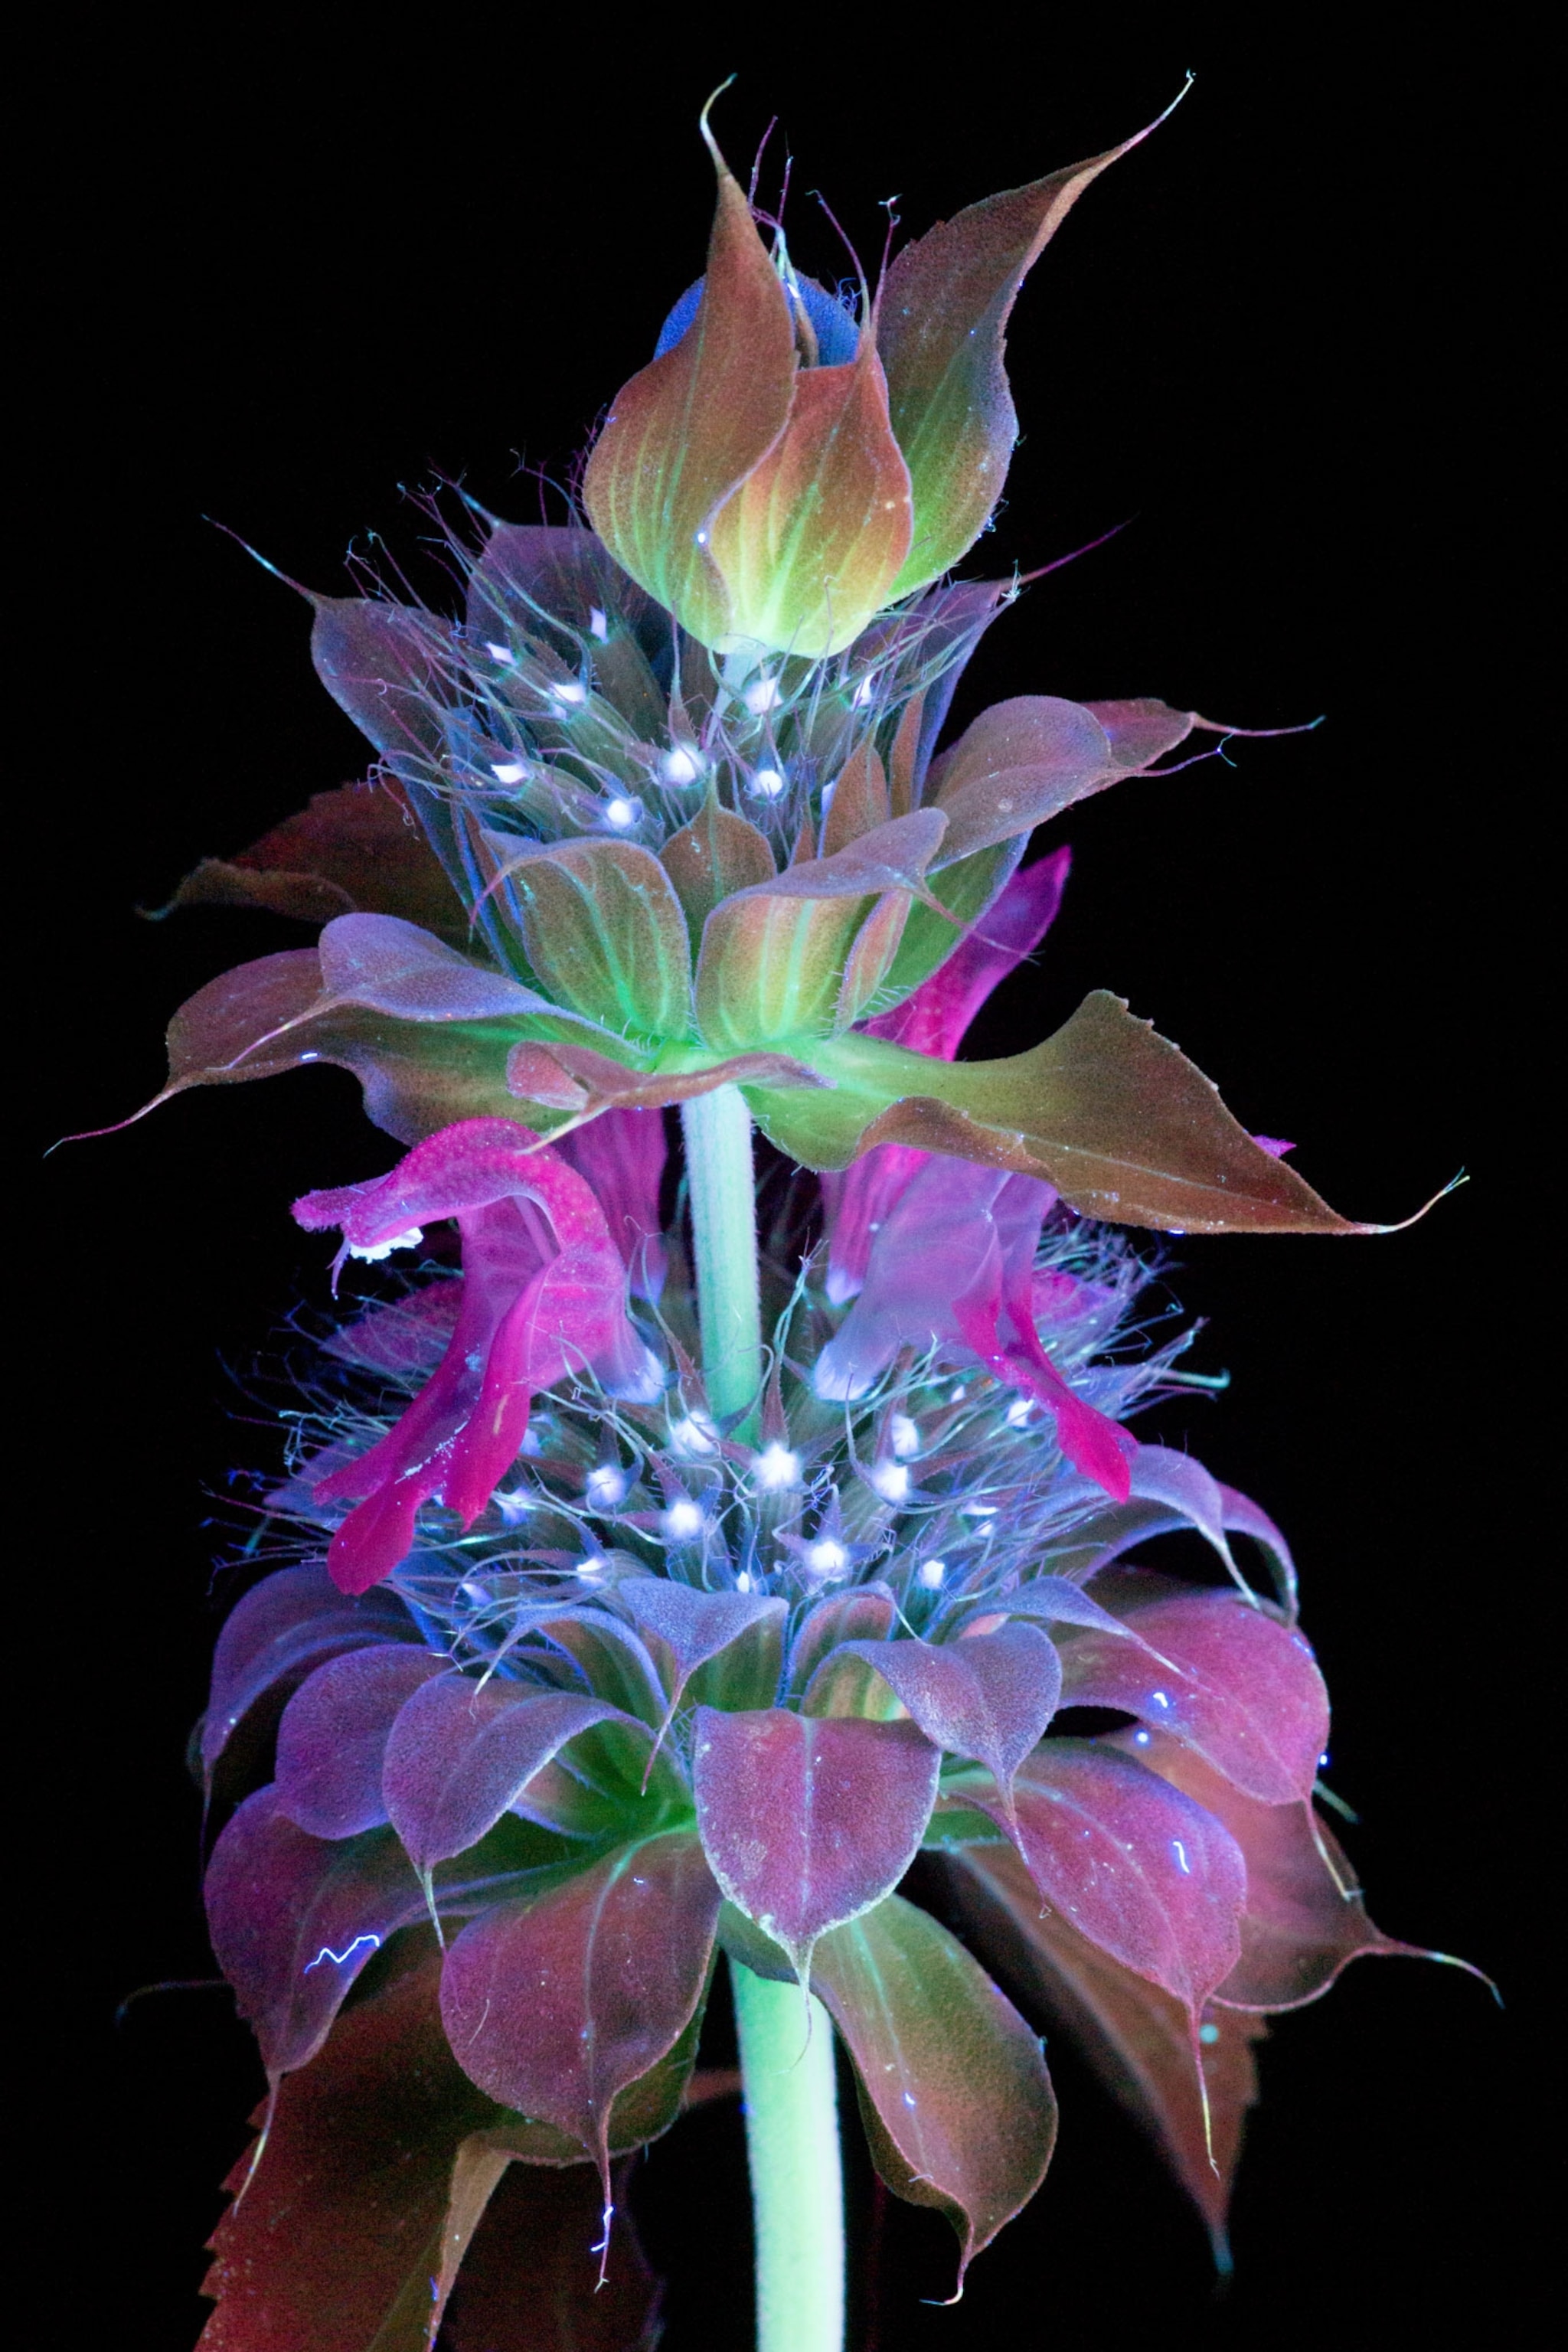 Picture: Flowers Glow Under UV Induced Visible Fluorescence